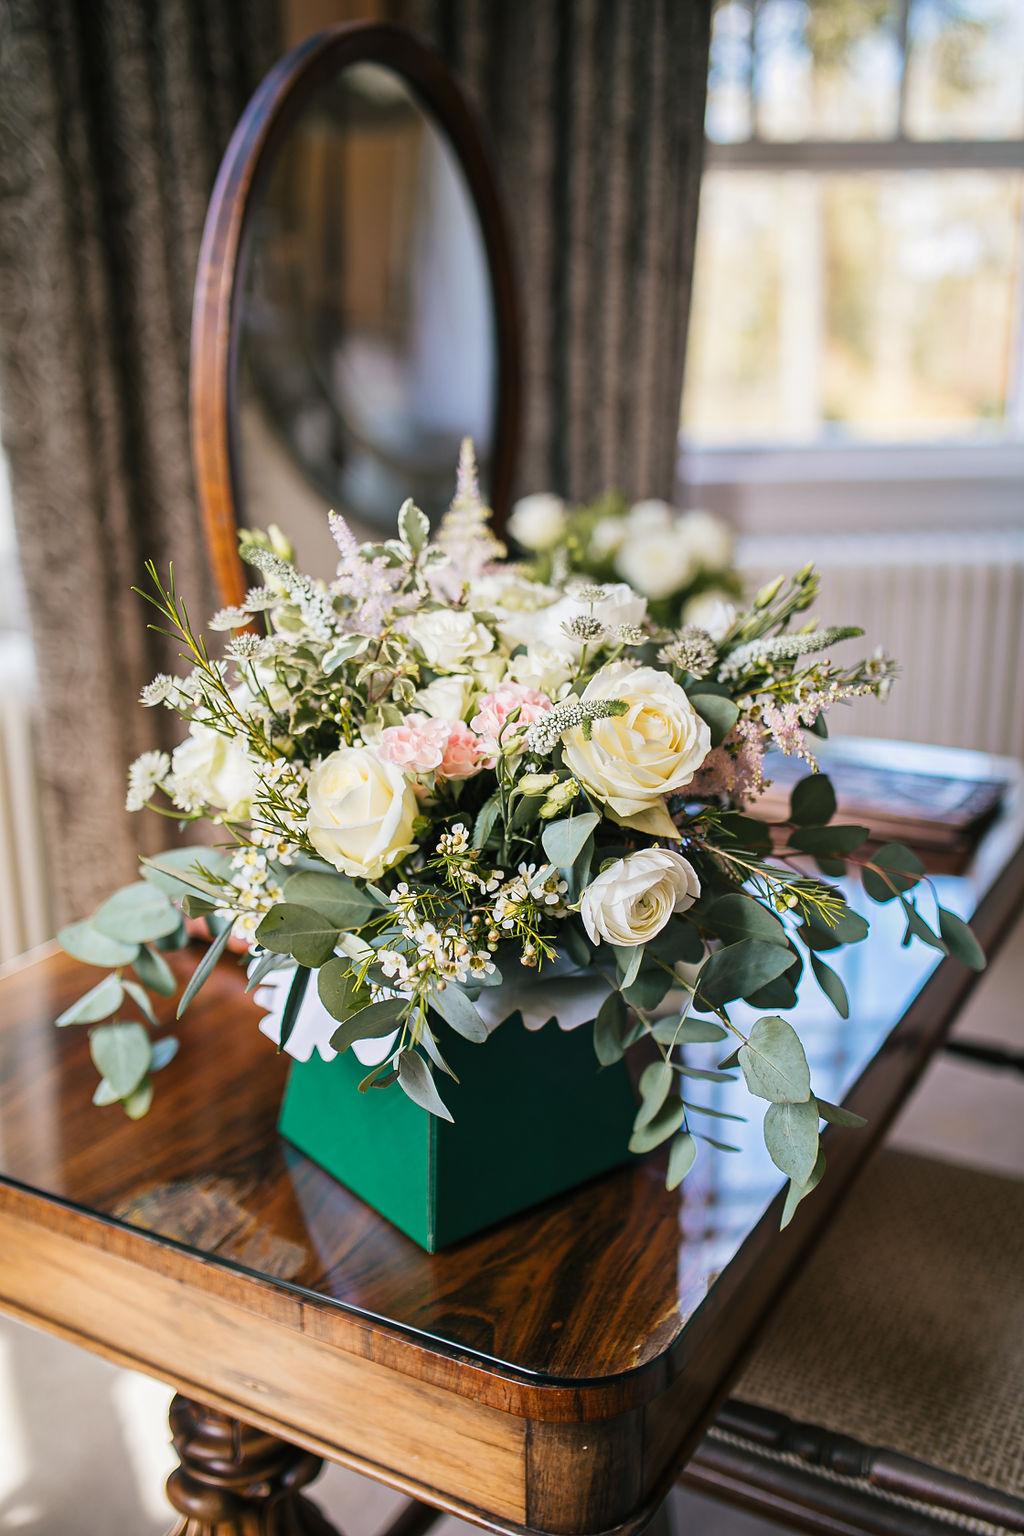 Large bouquet of flowers containing lots of white roses sits on a mahogany dressing table